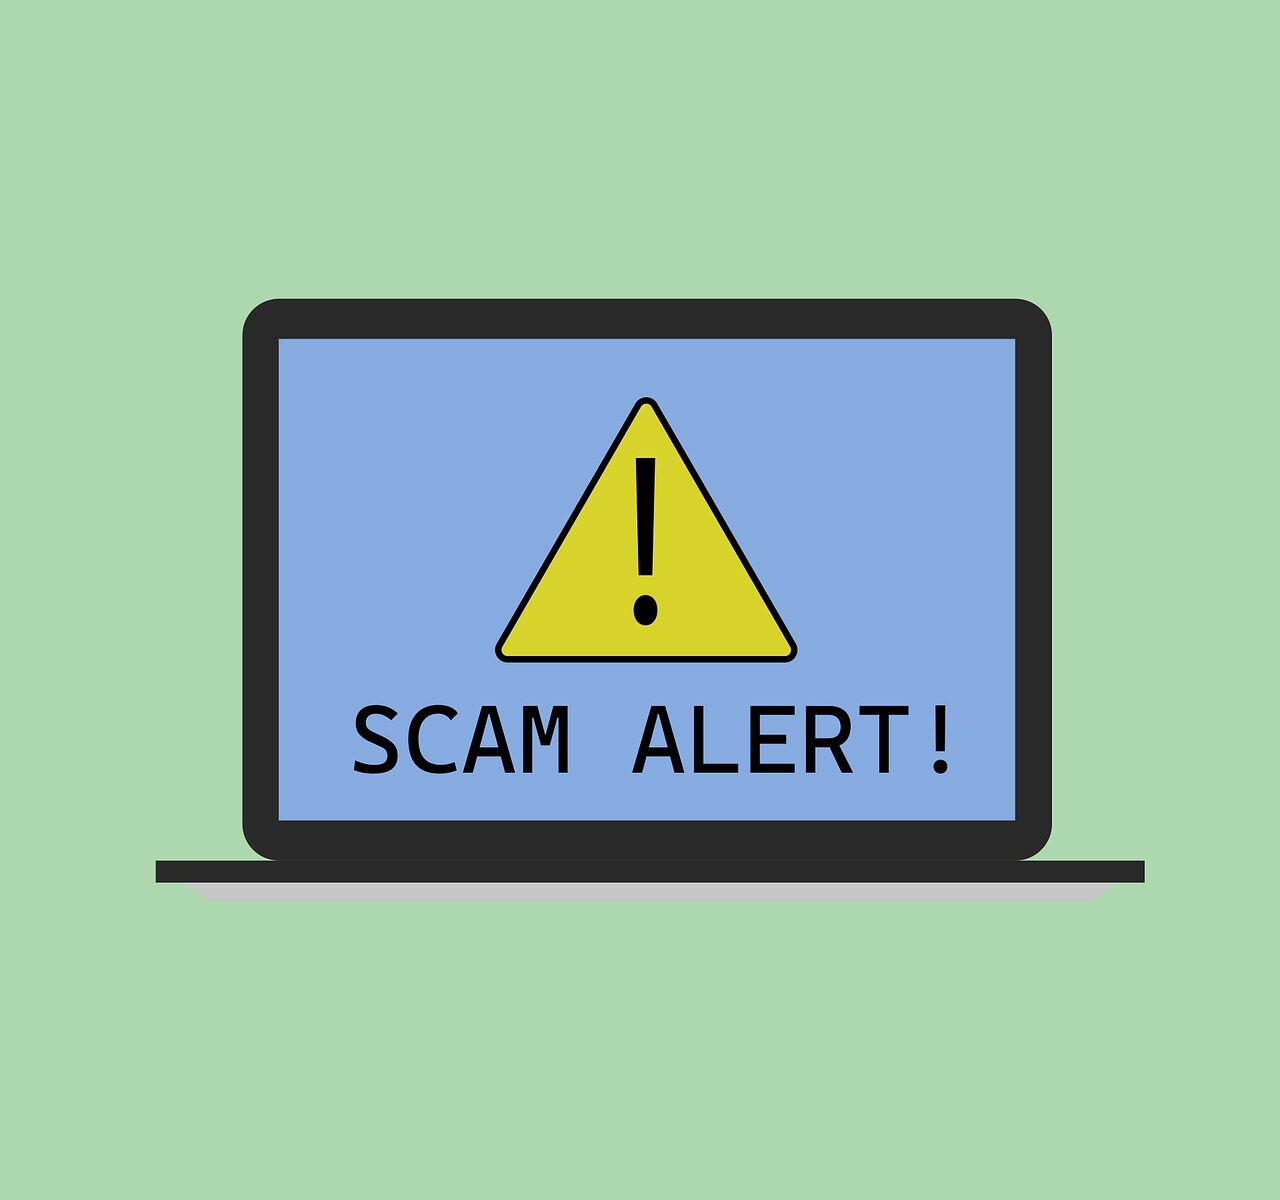 Laptop screen with "Scam Alert!" warning